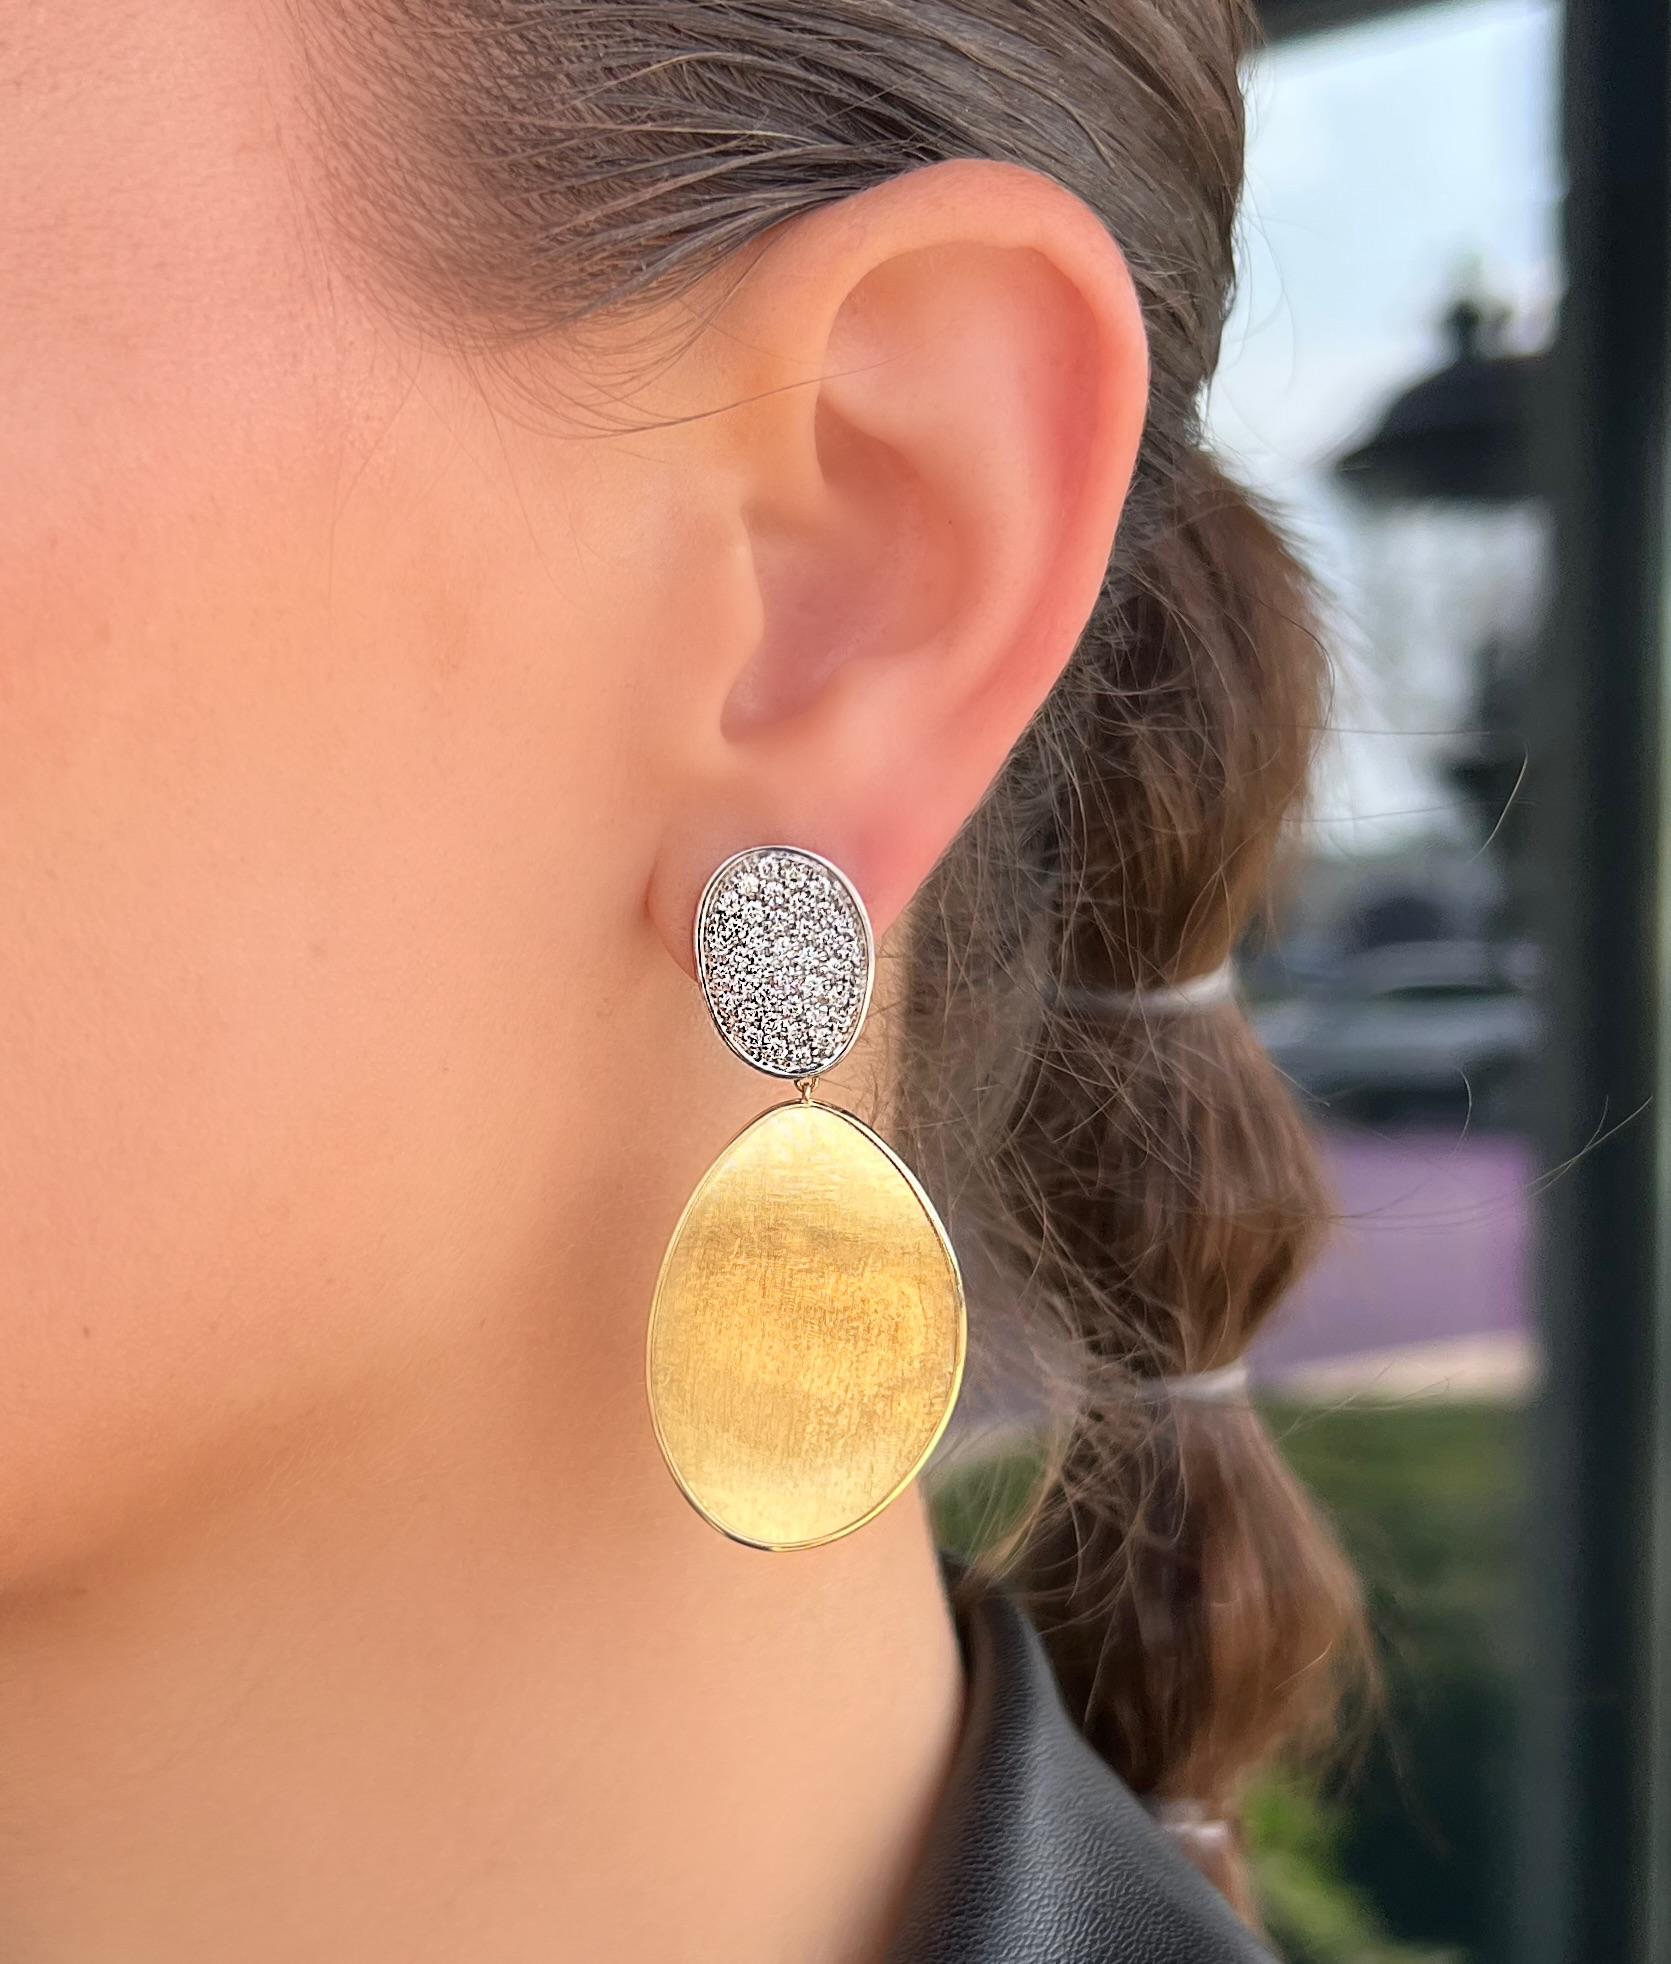 These lovely 18K Yellow Gold and Diamond drop earrings are the perfect addition to any collection. They are instantly recognizable as Marco Bicego and are excellent for a night out. The earrings feature 2 smaller diamond pave disks perched on top of